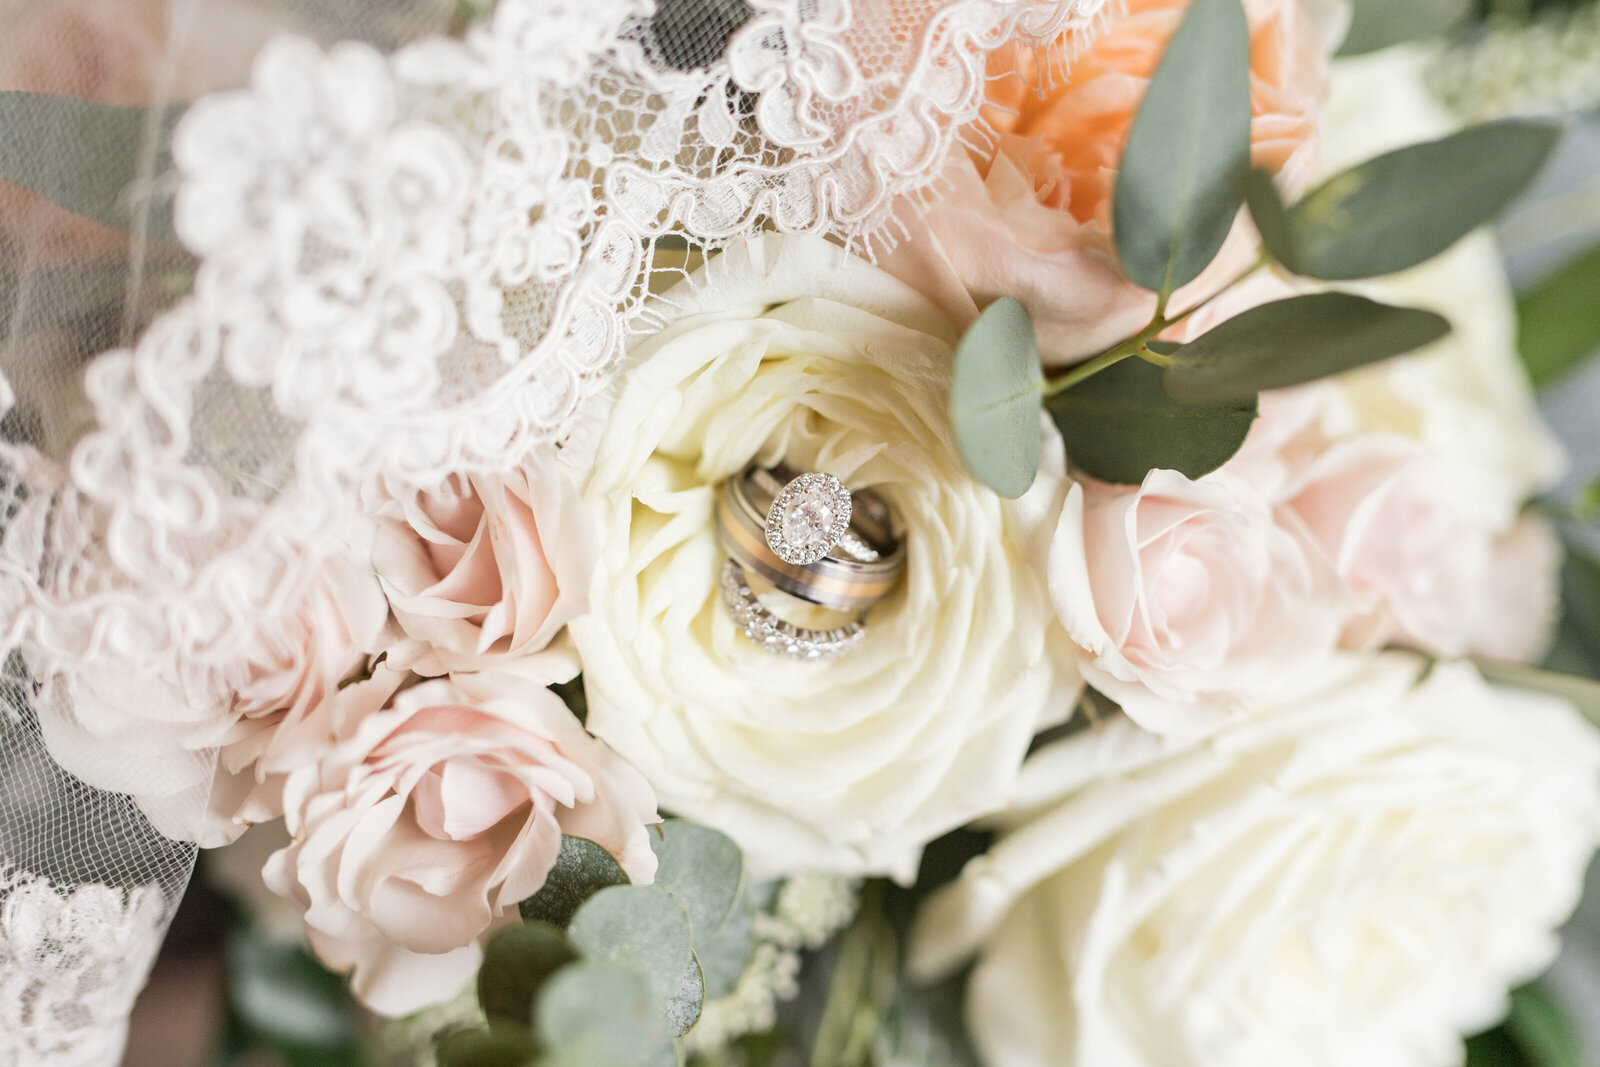 engagement ring sitting in bridal bouquet photographed by Kaitlin Mendoza Photography, an Indianapolis wedding photographer